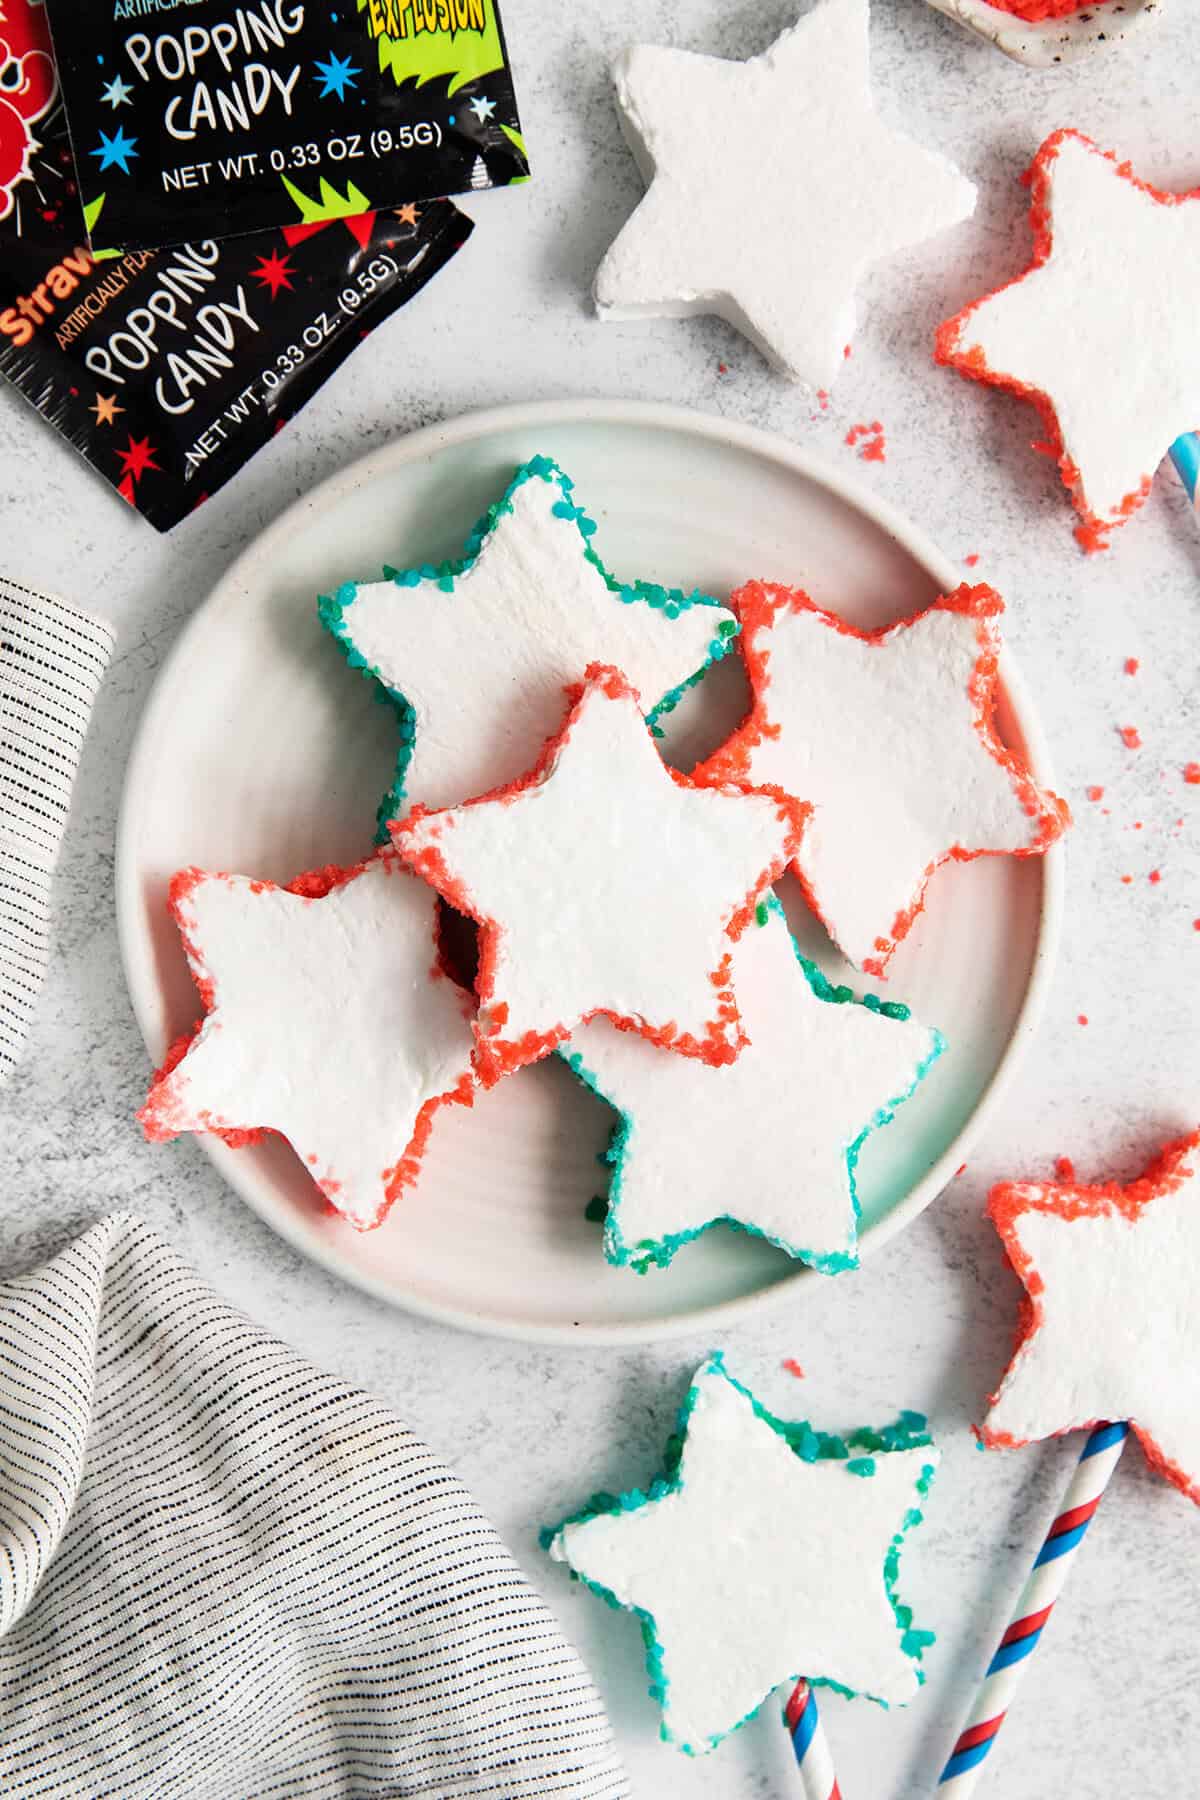 The star shaped marshmallows edged with Pop Rocks on a plate.